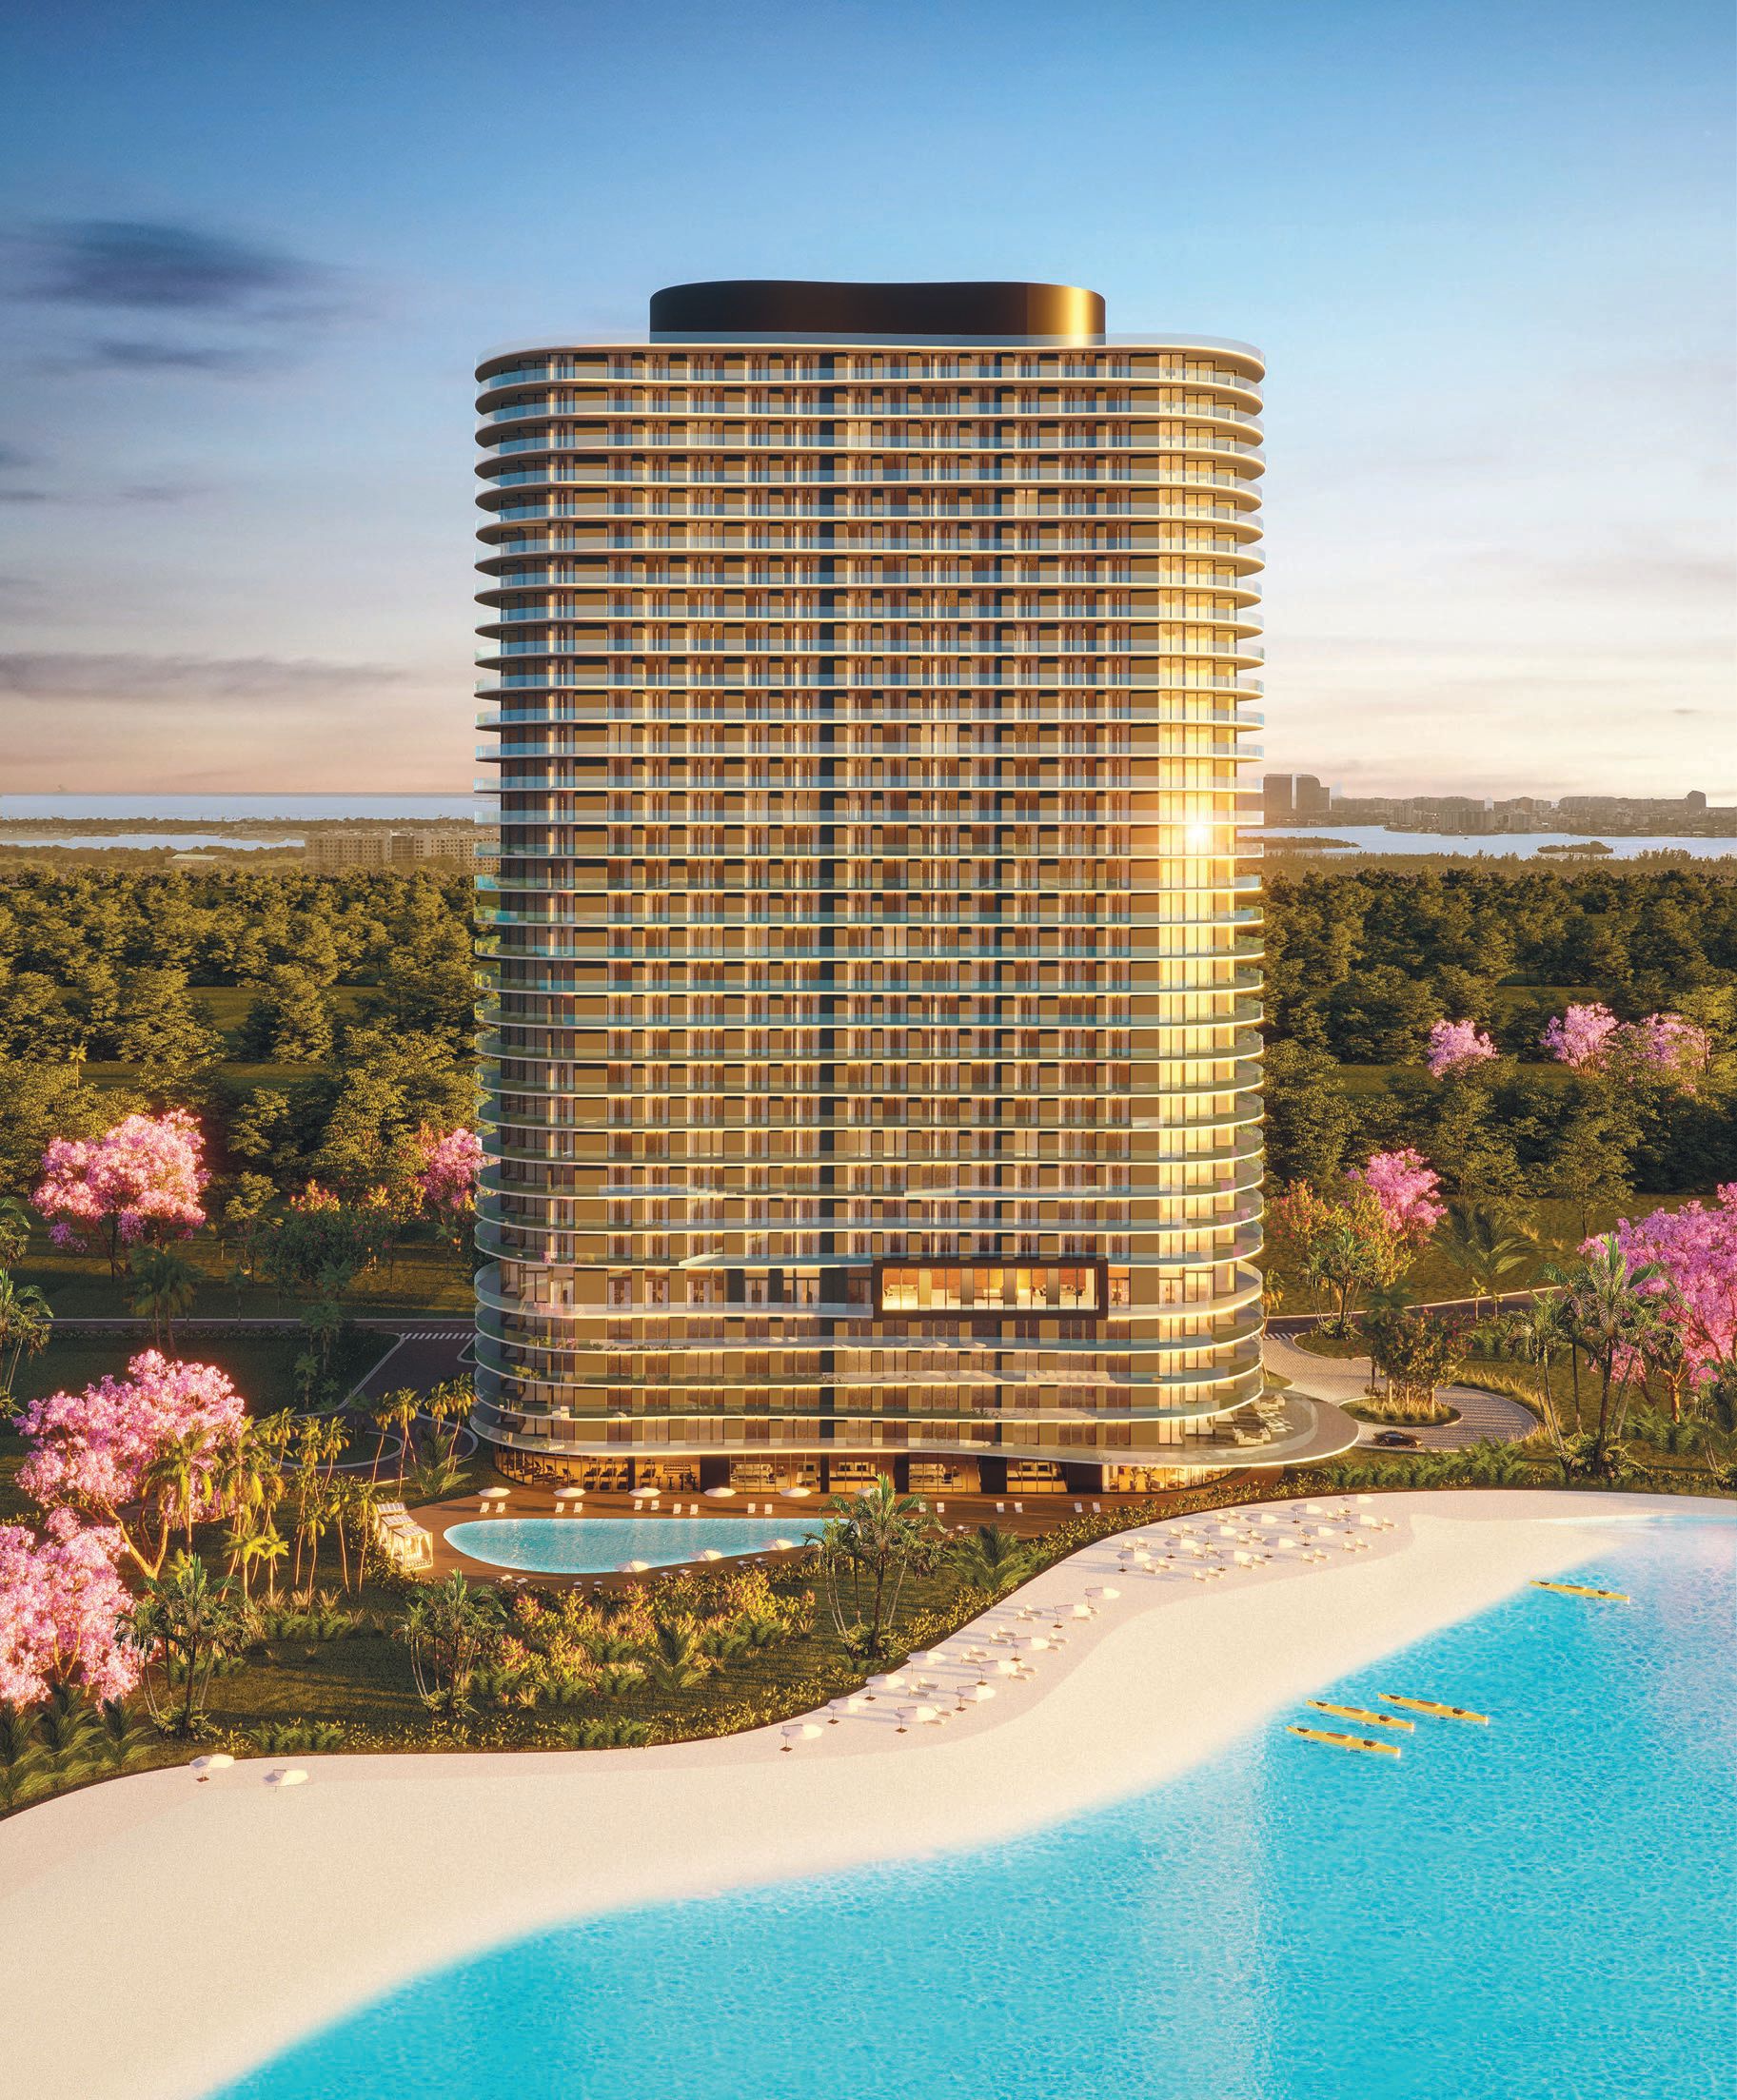 Exterior rendering of ONE Park Tower and its lagoon PHOTO COURTESY OF ONE PARK TOWER BY TURNBERRY